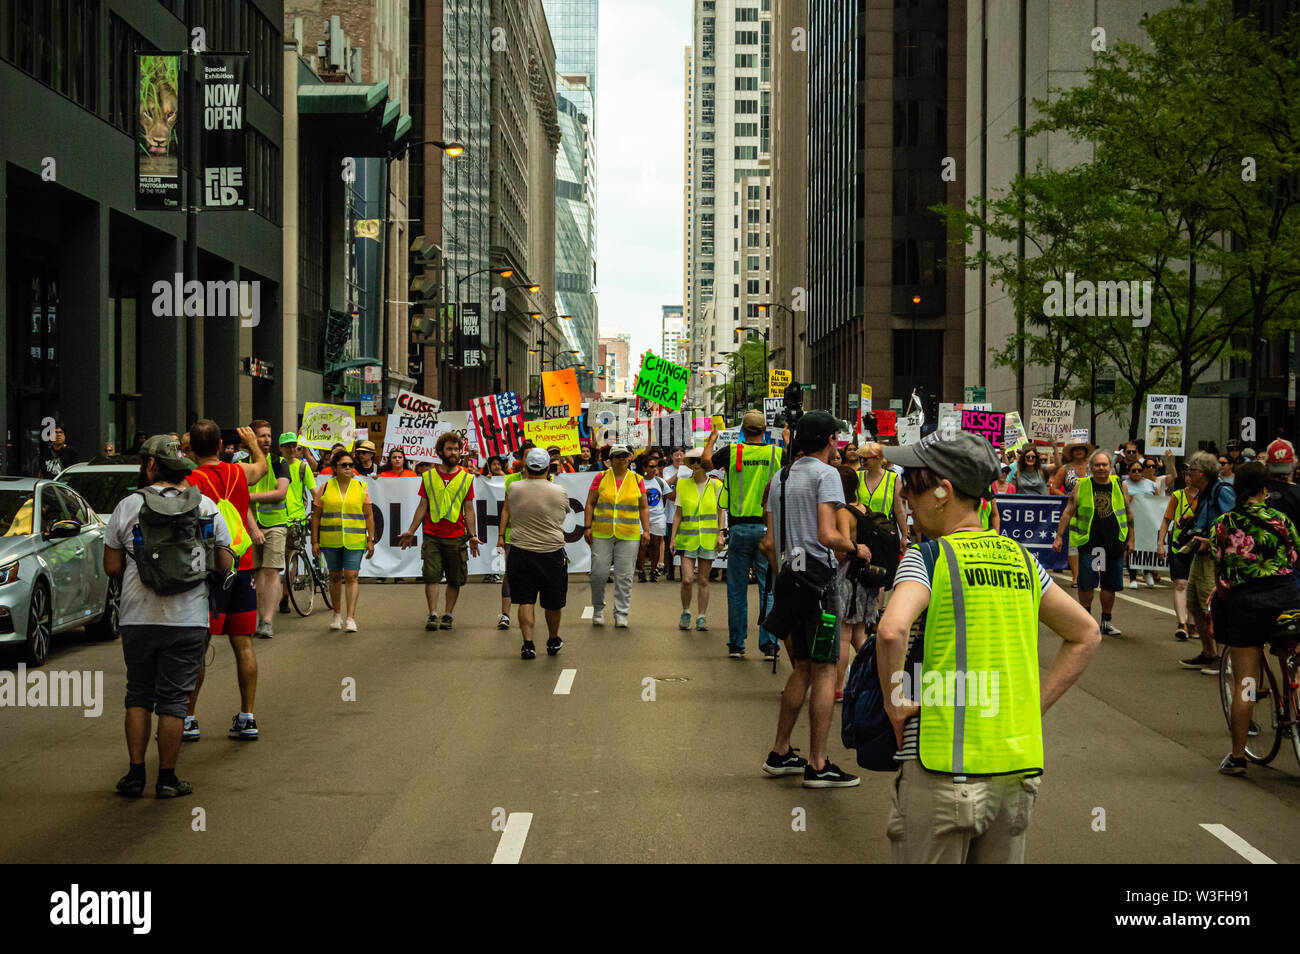 Downtown, Chicago-July 13, 2019: Protest against ICE and Customs and Border Patrol Detention Centers. Marching through streets. Stock Photo